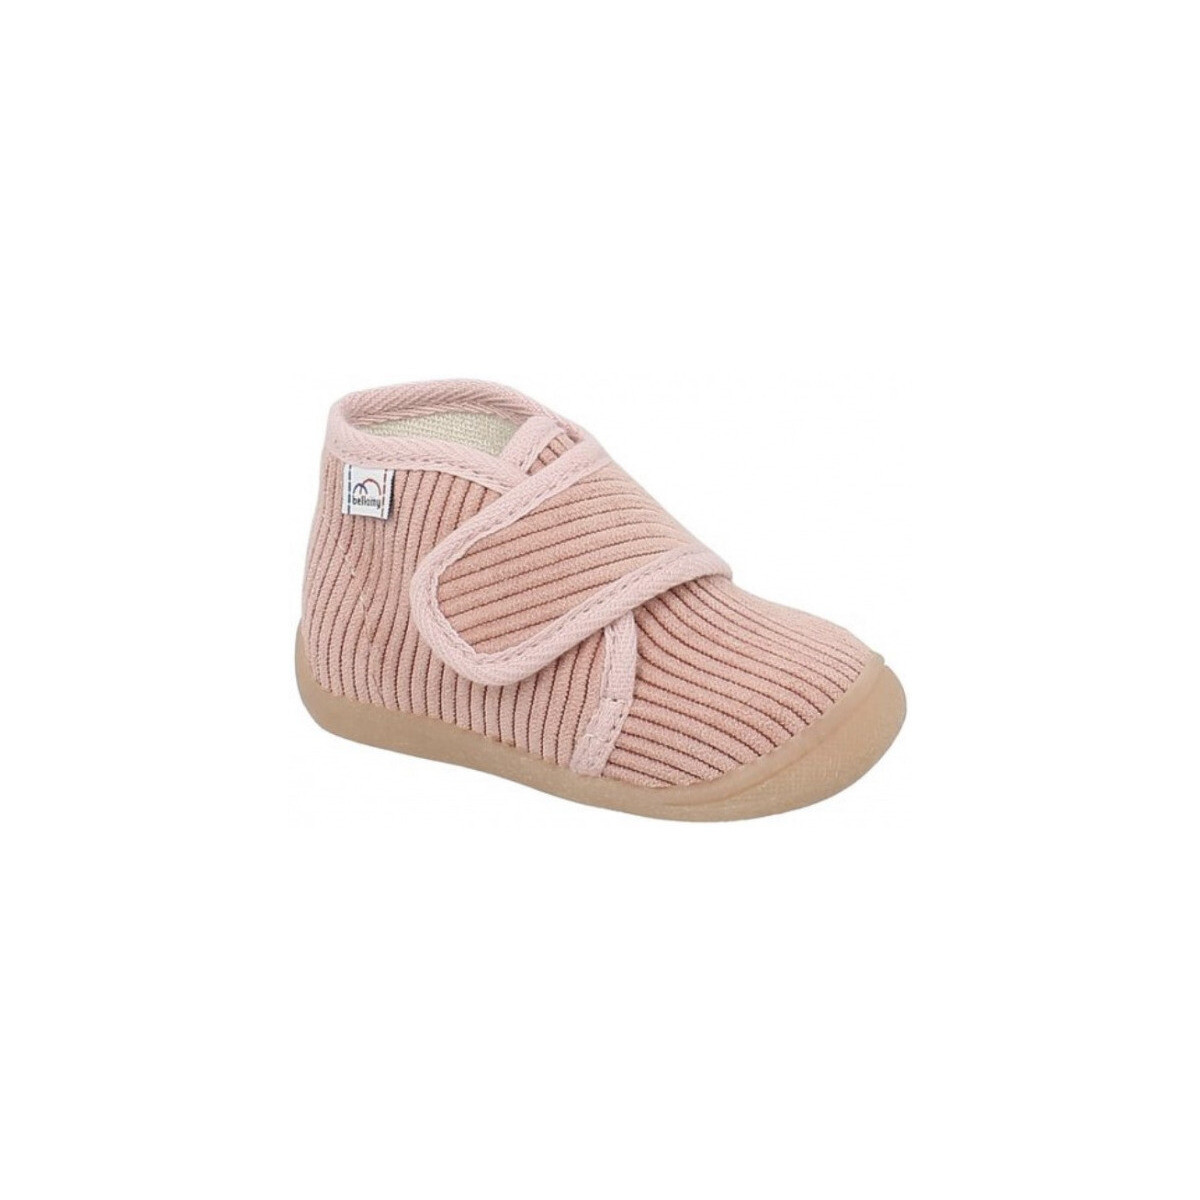 Chaussures Fille Chaussons Bellamy AMANDINE Rose